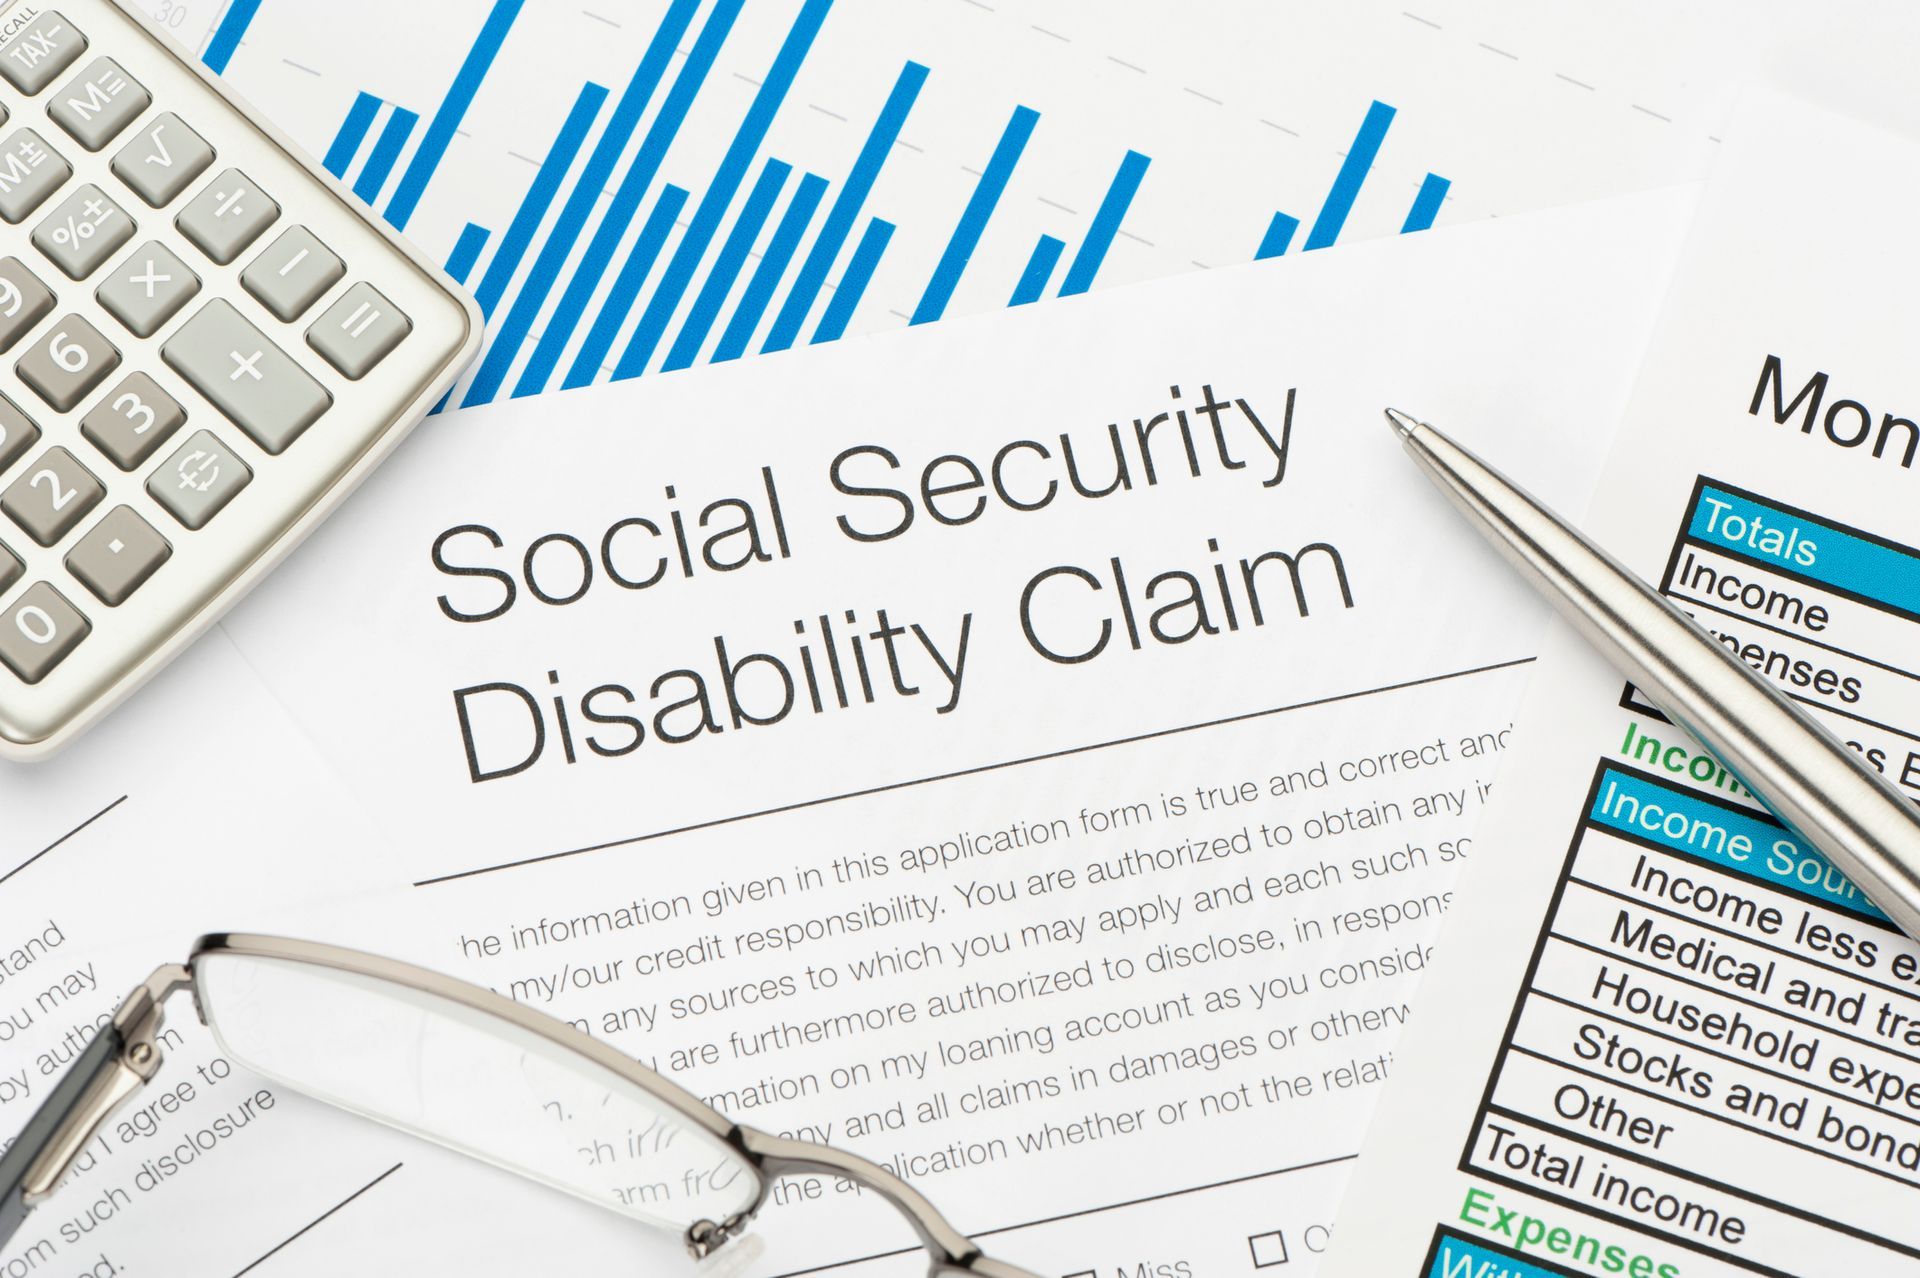 Social Security Disability Claim — Abingdon, VA — Law Offices of Michael R. Munsey, P.C.